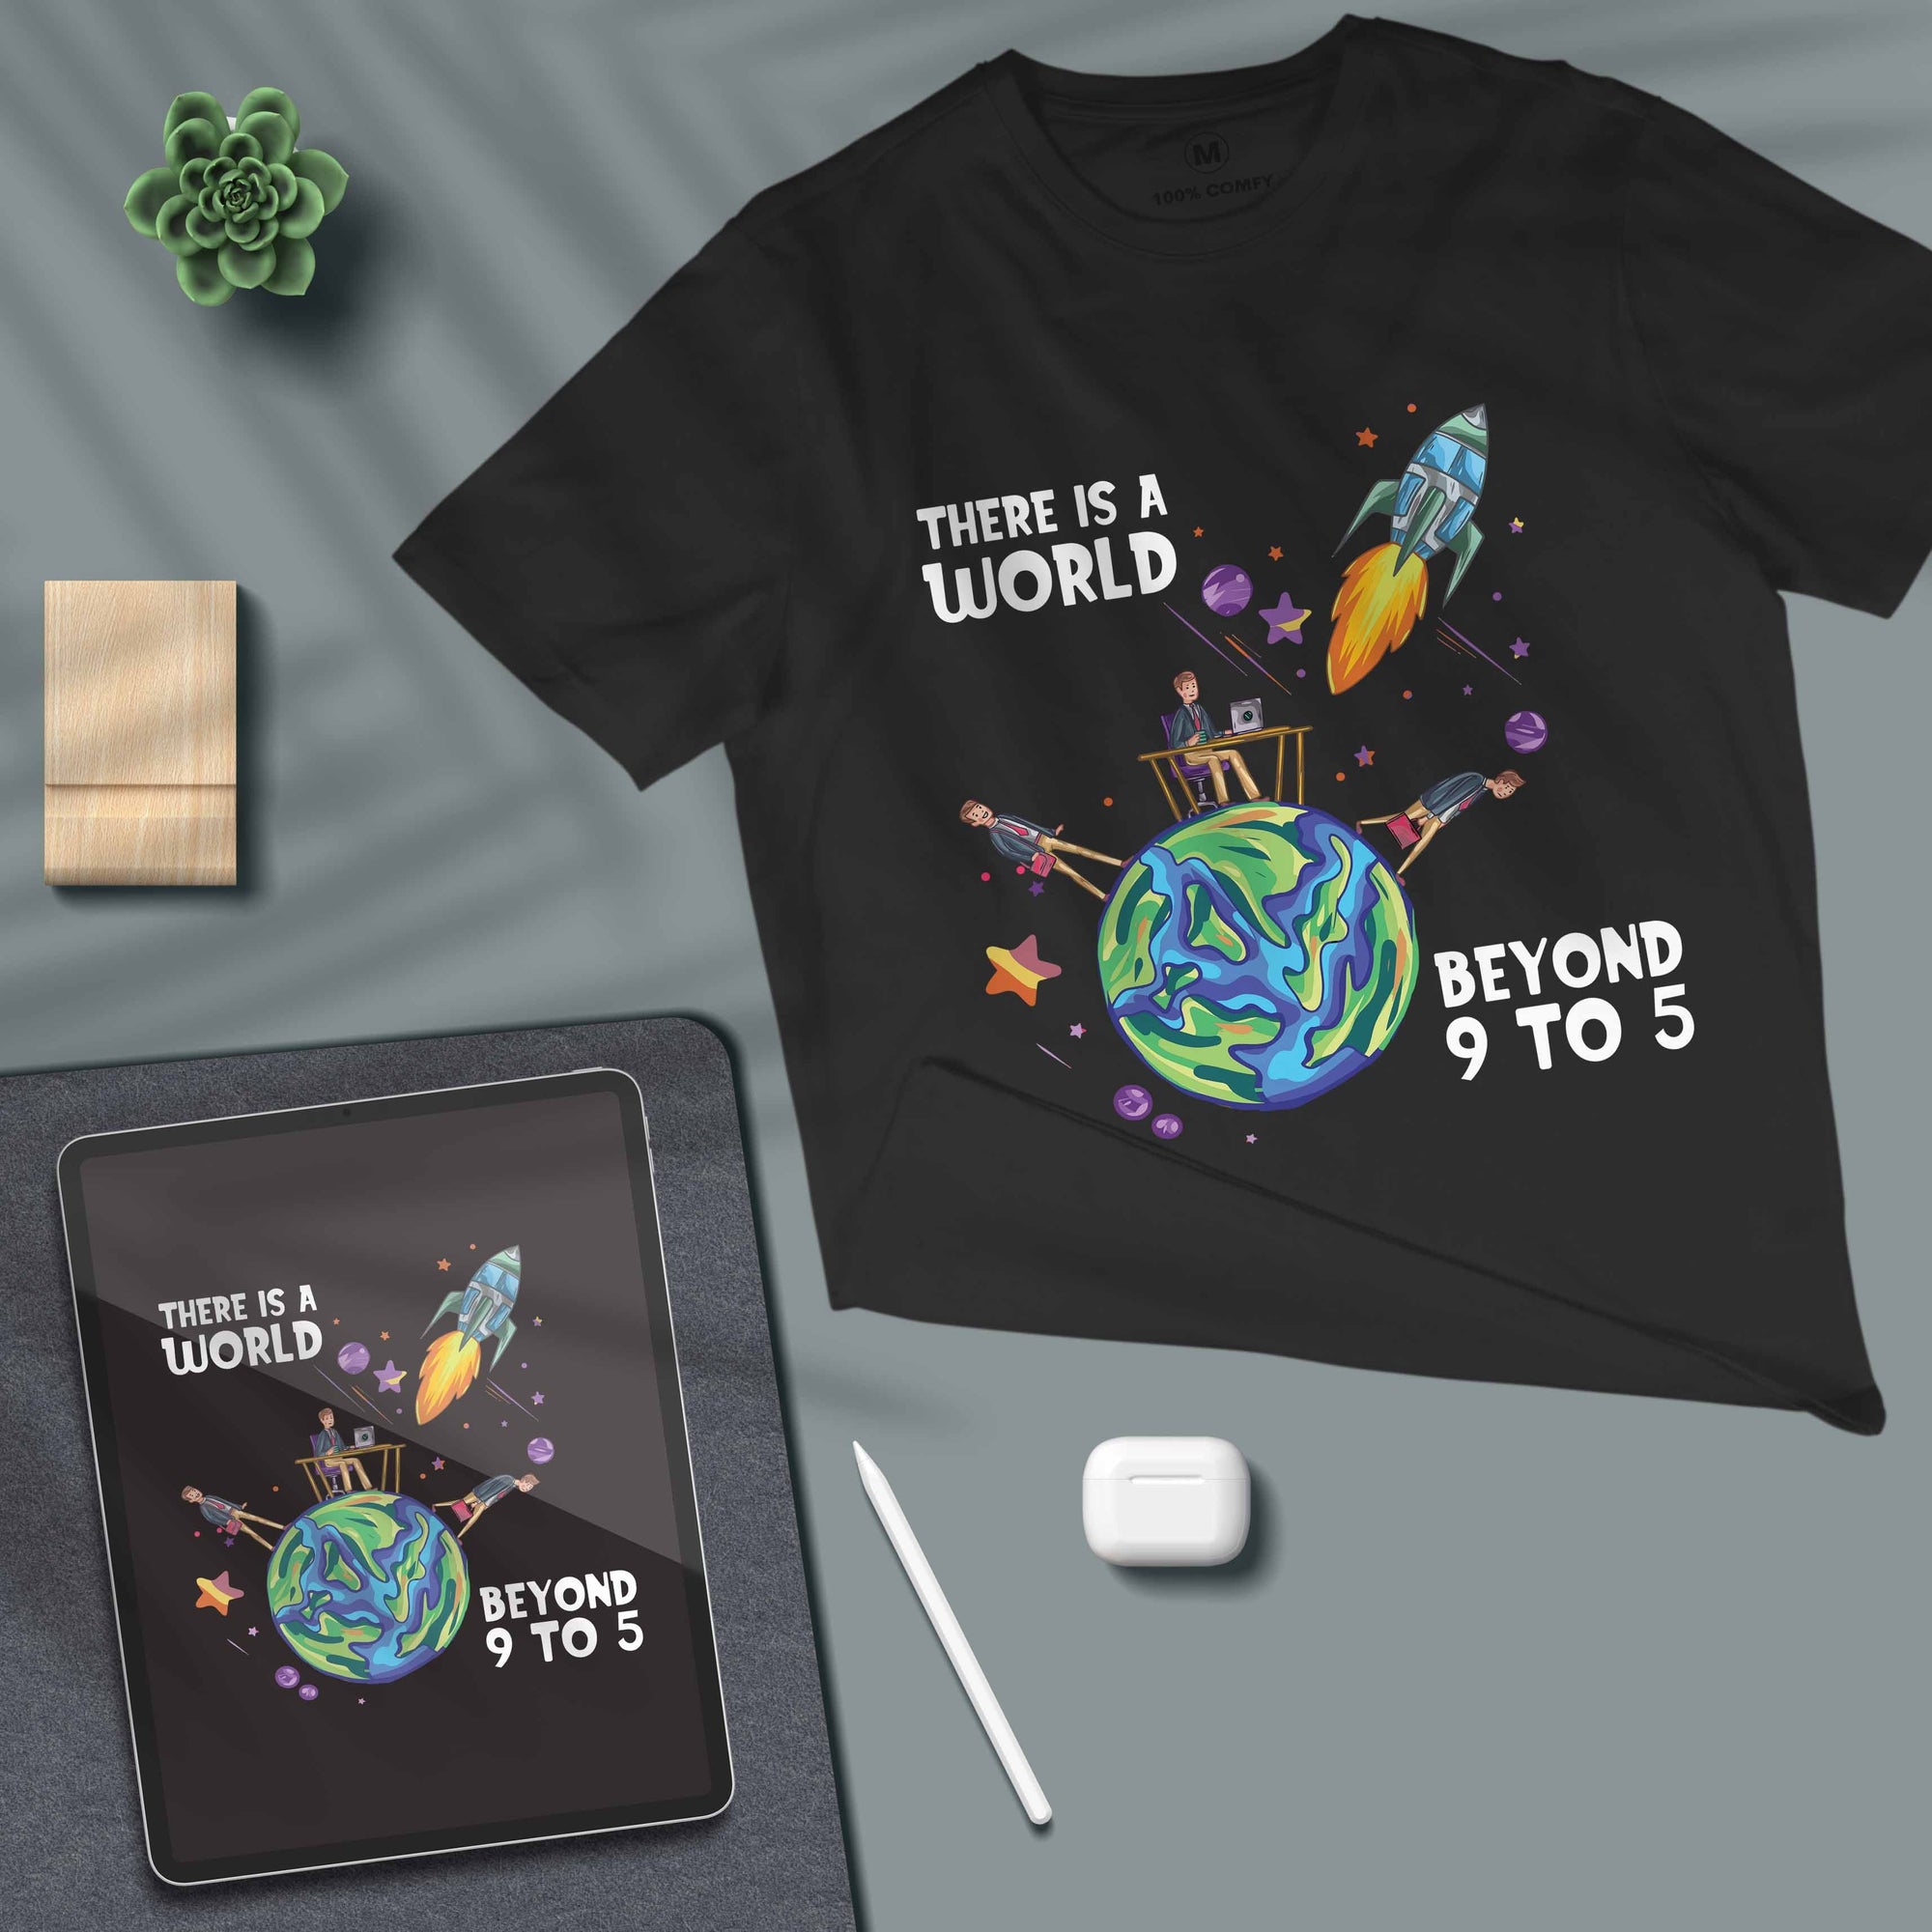 There is a world beyond 9 to 5 - Unisex T-shirt